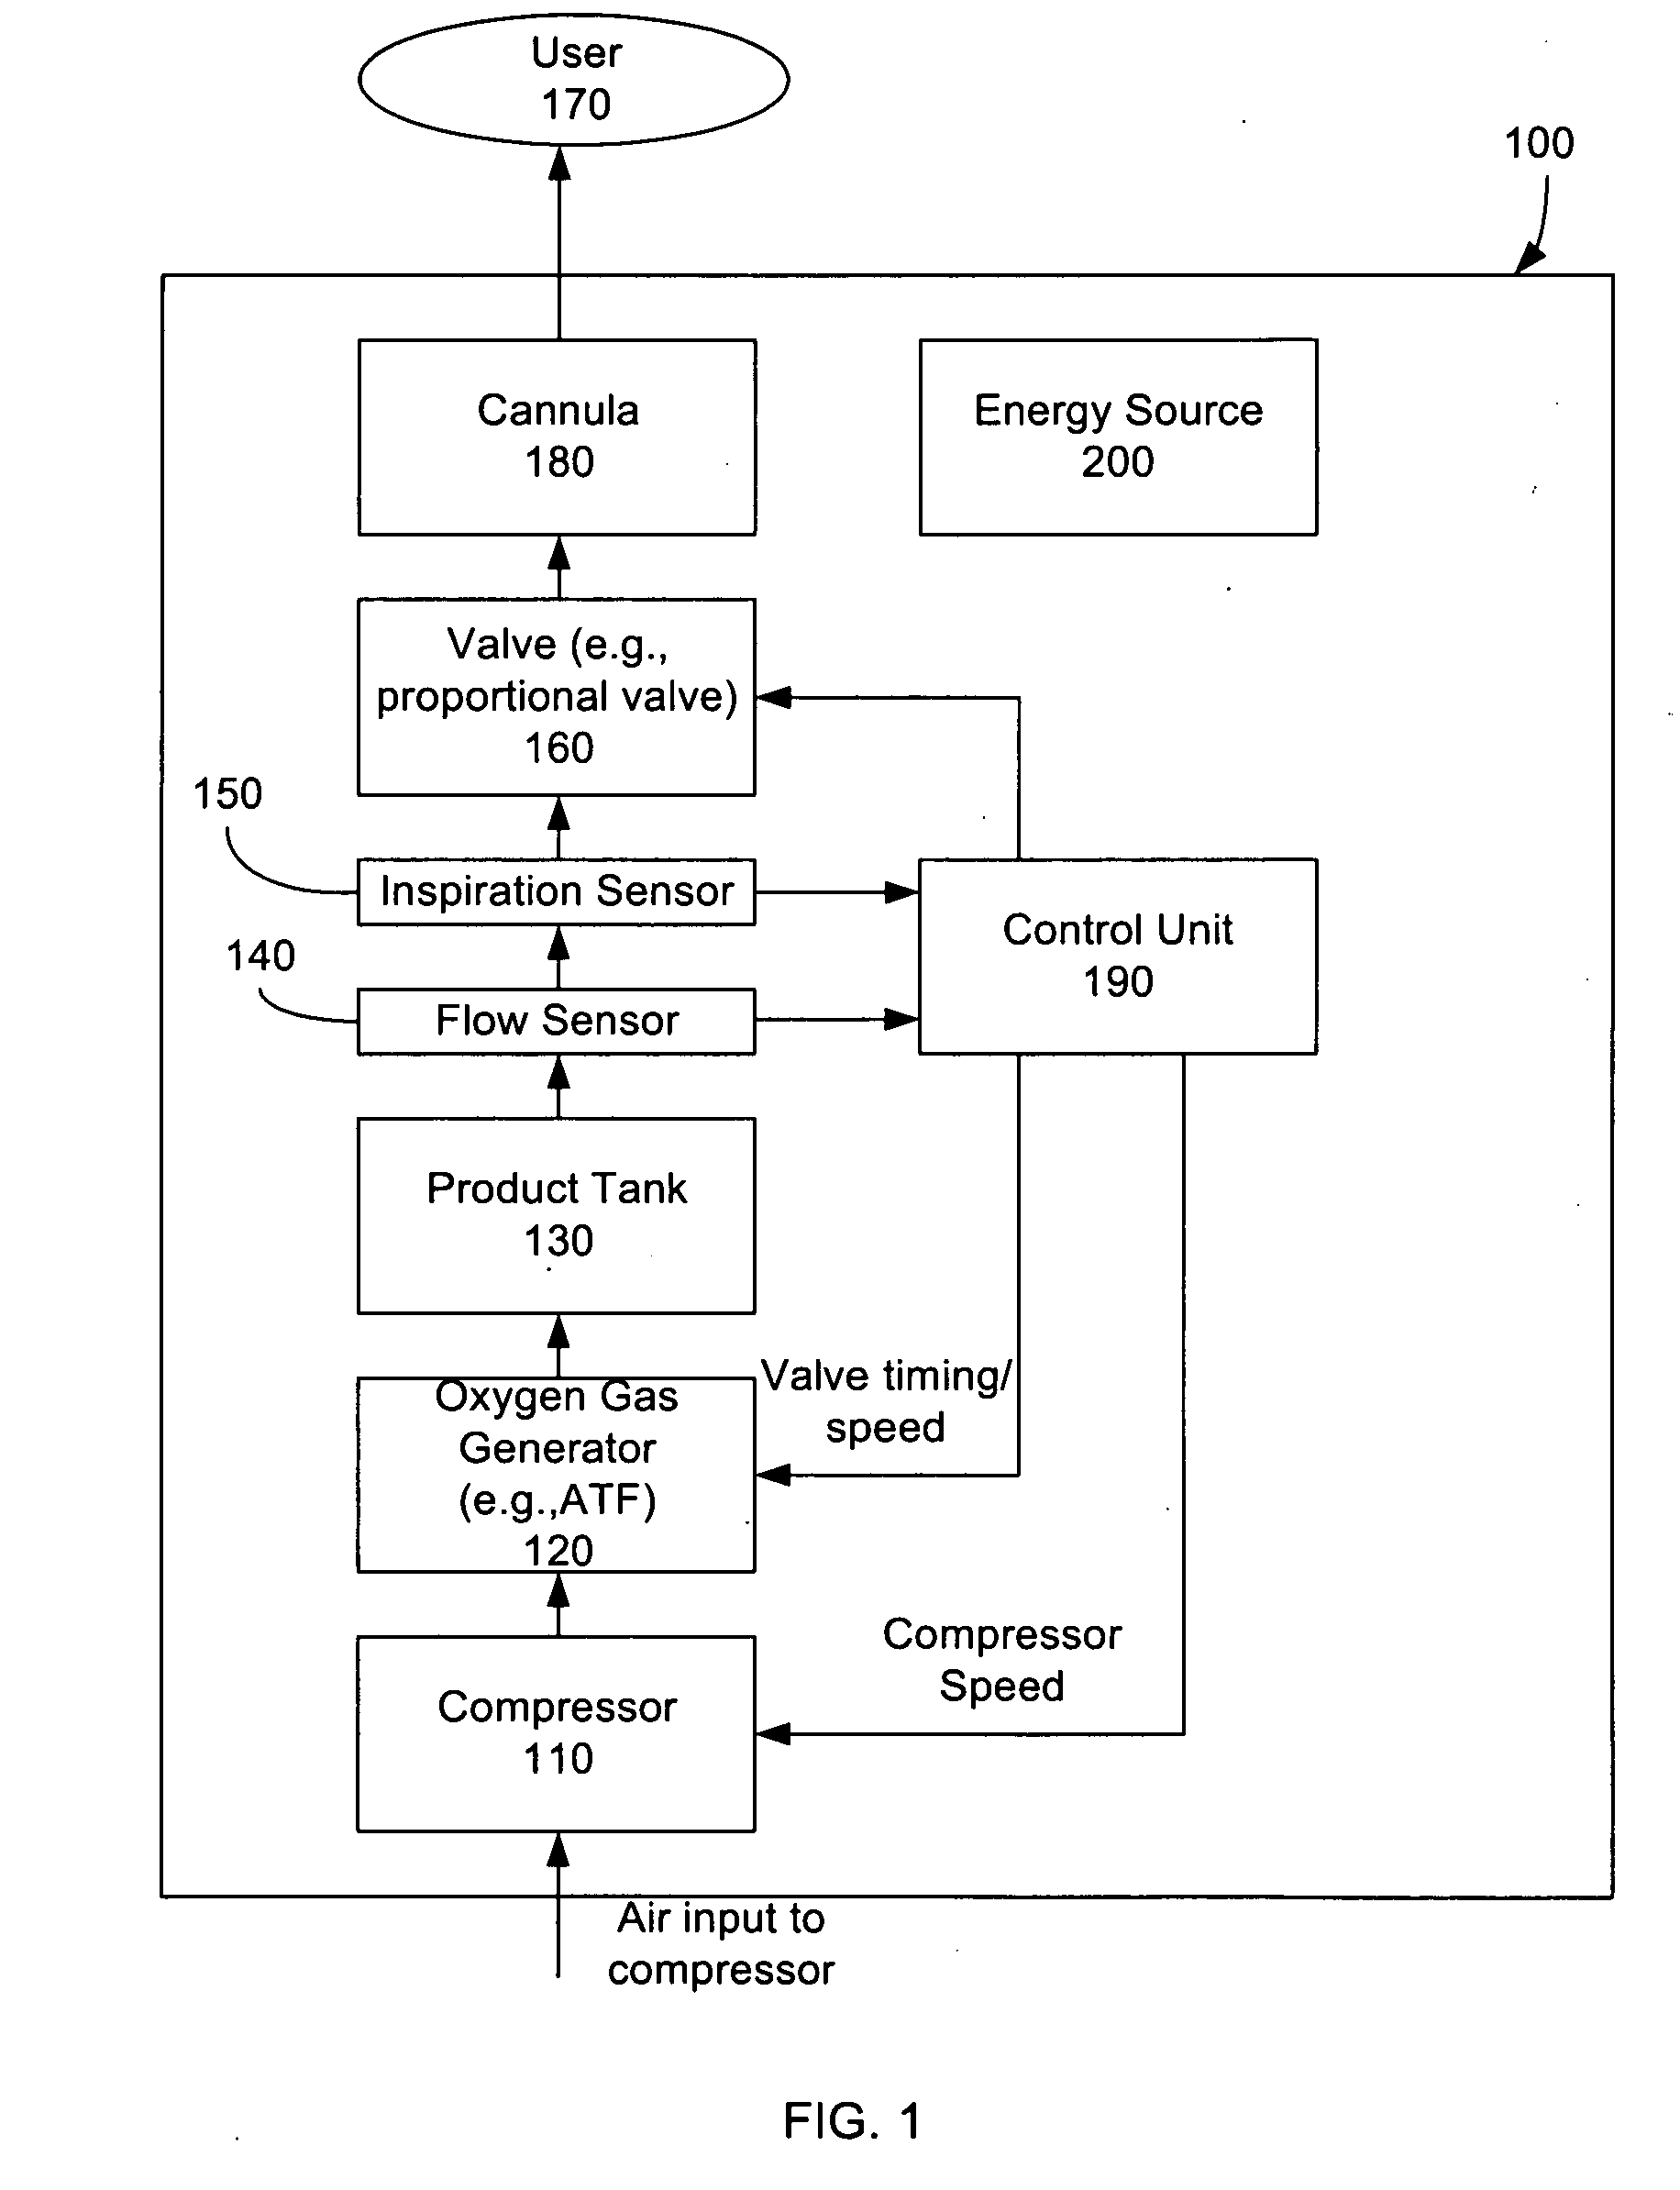 System and Method for Controlling Supply of Oxygen Based on Breathing Rate